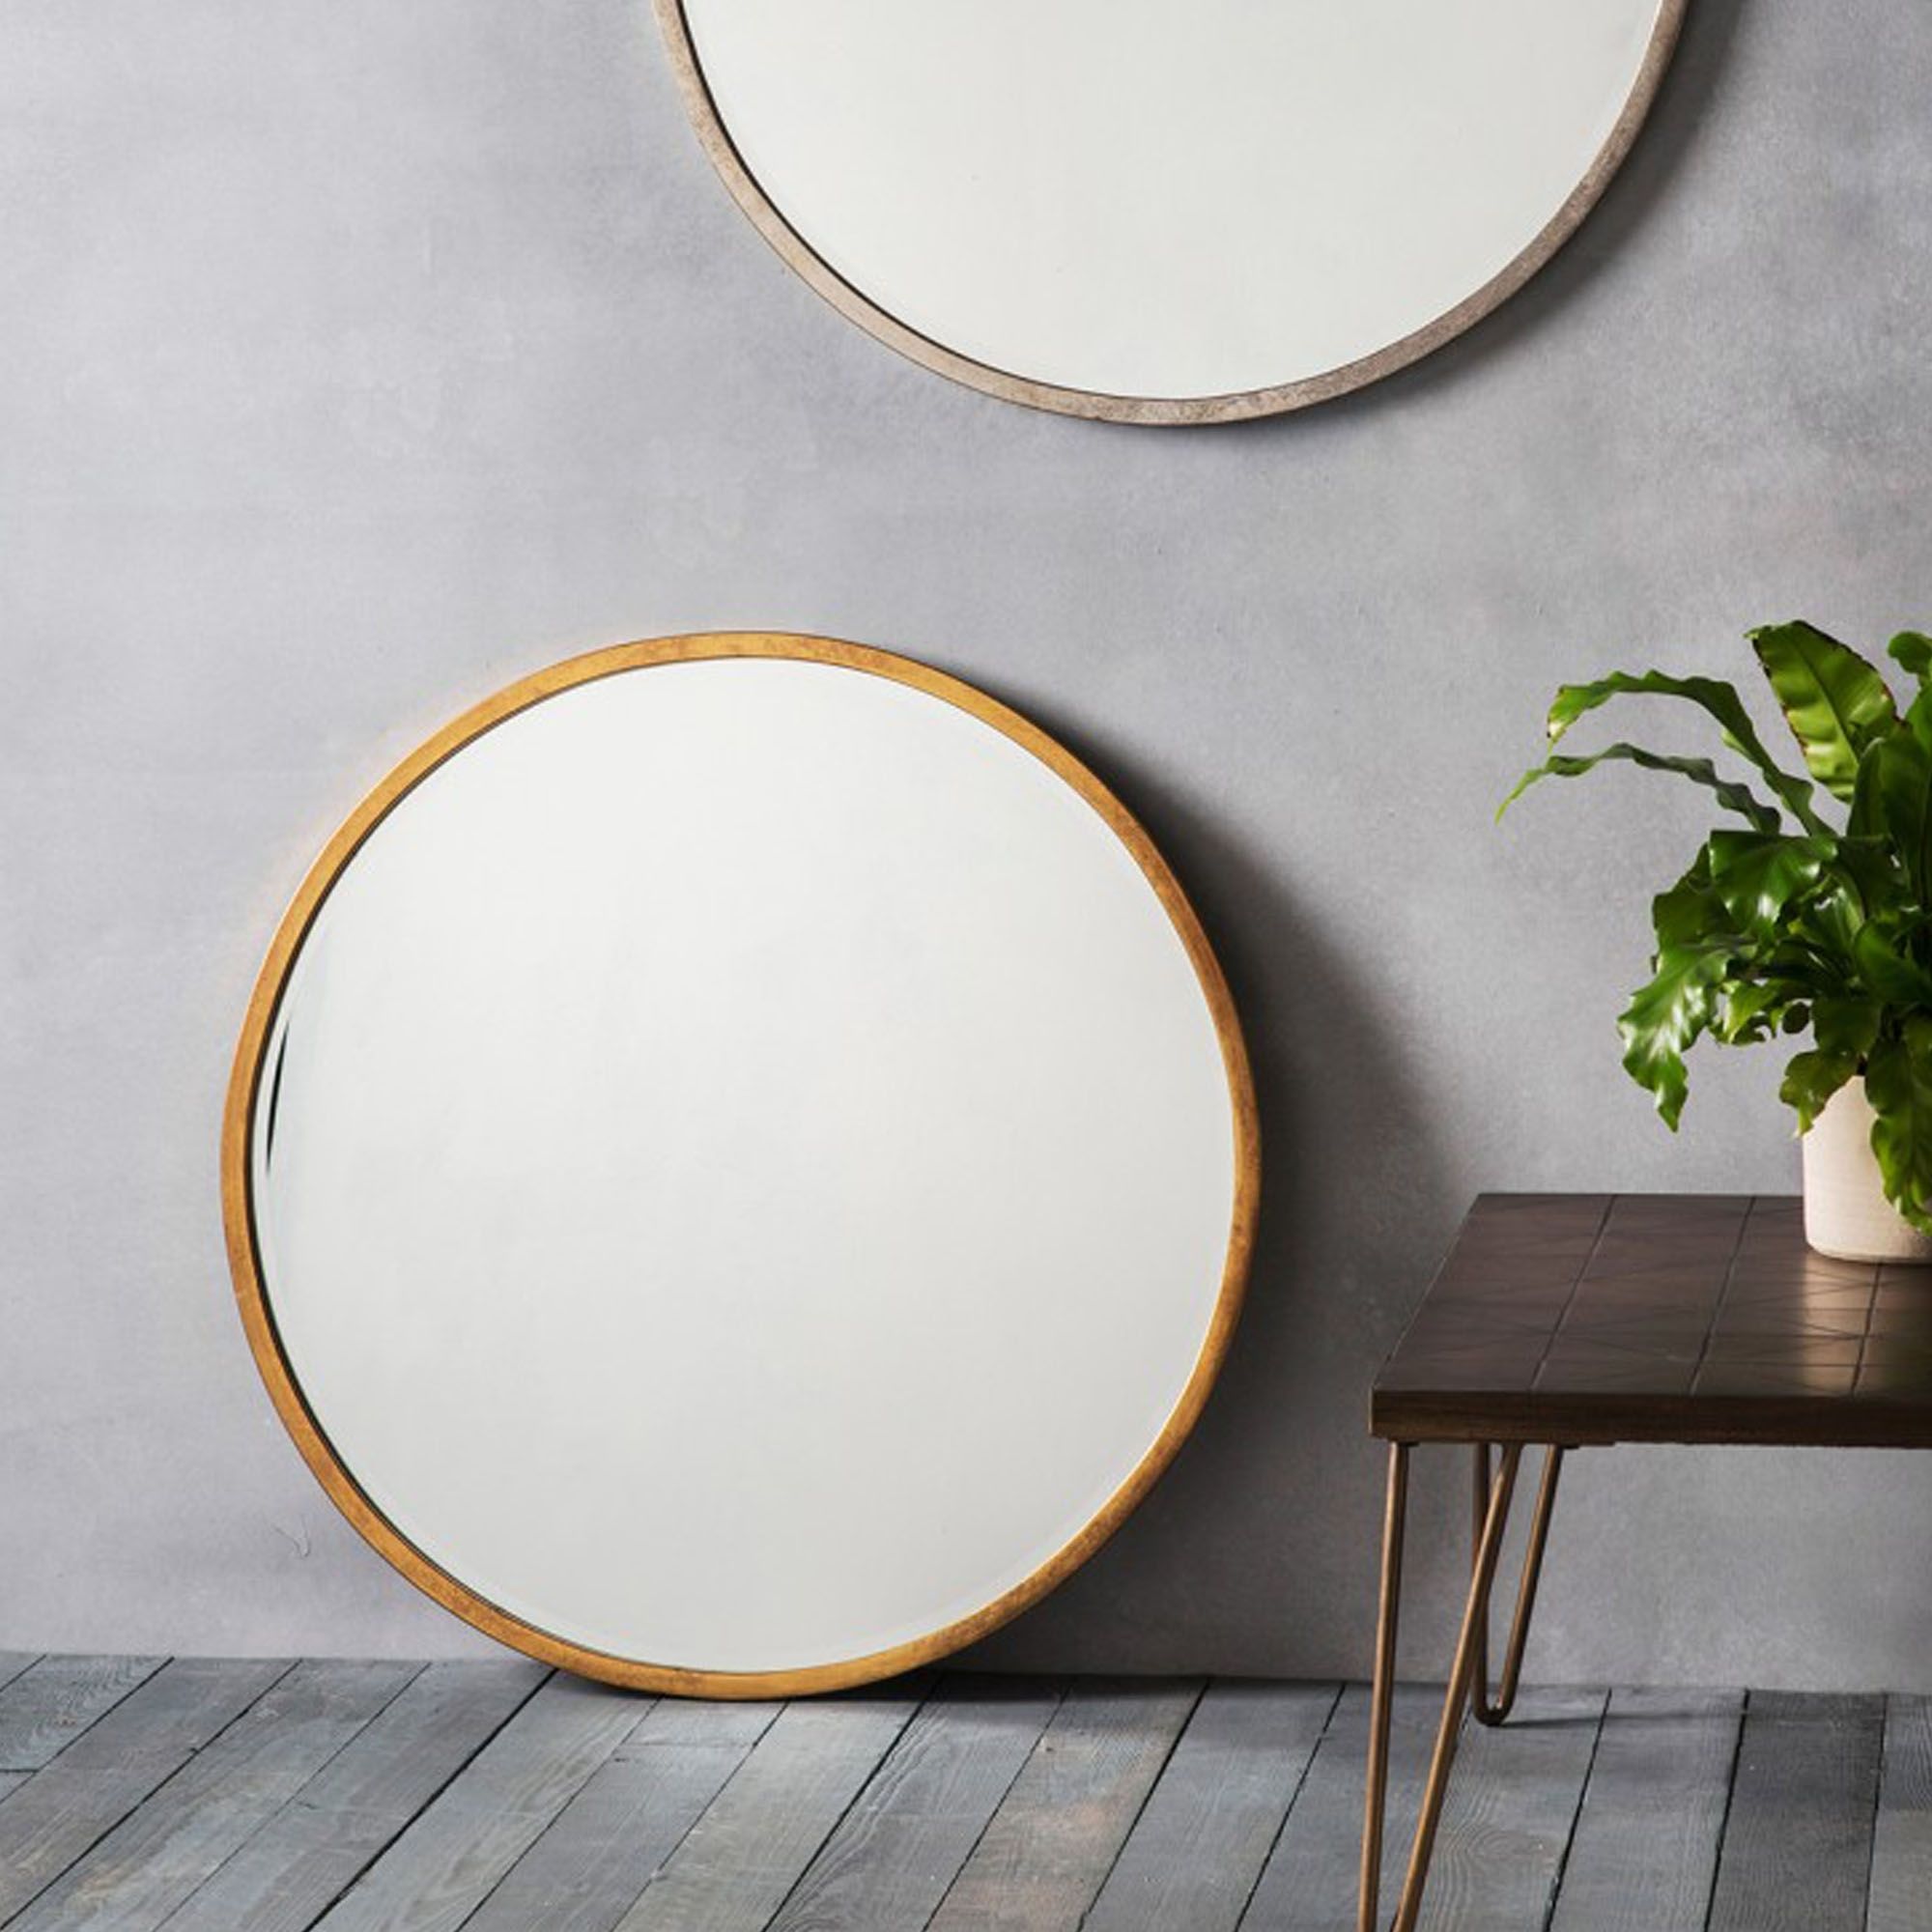 Higgins Antique Gold Round Wall Mirror | Wall Mirrors | Homesdirect365 Intended For Shiny Black Round Wall Mirrors (View 2 of 15)